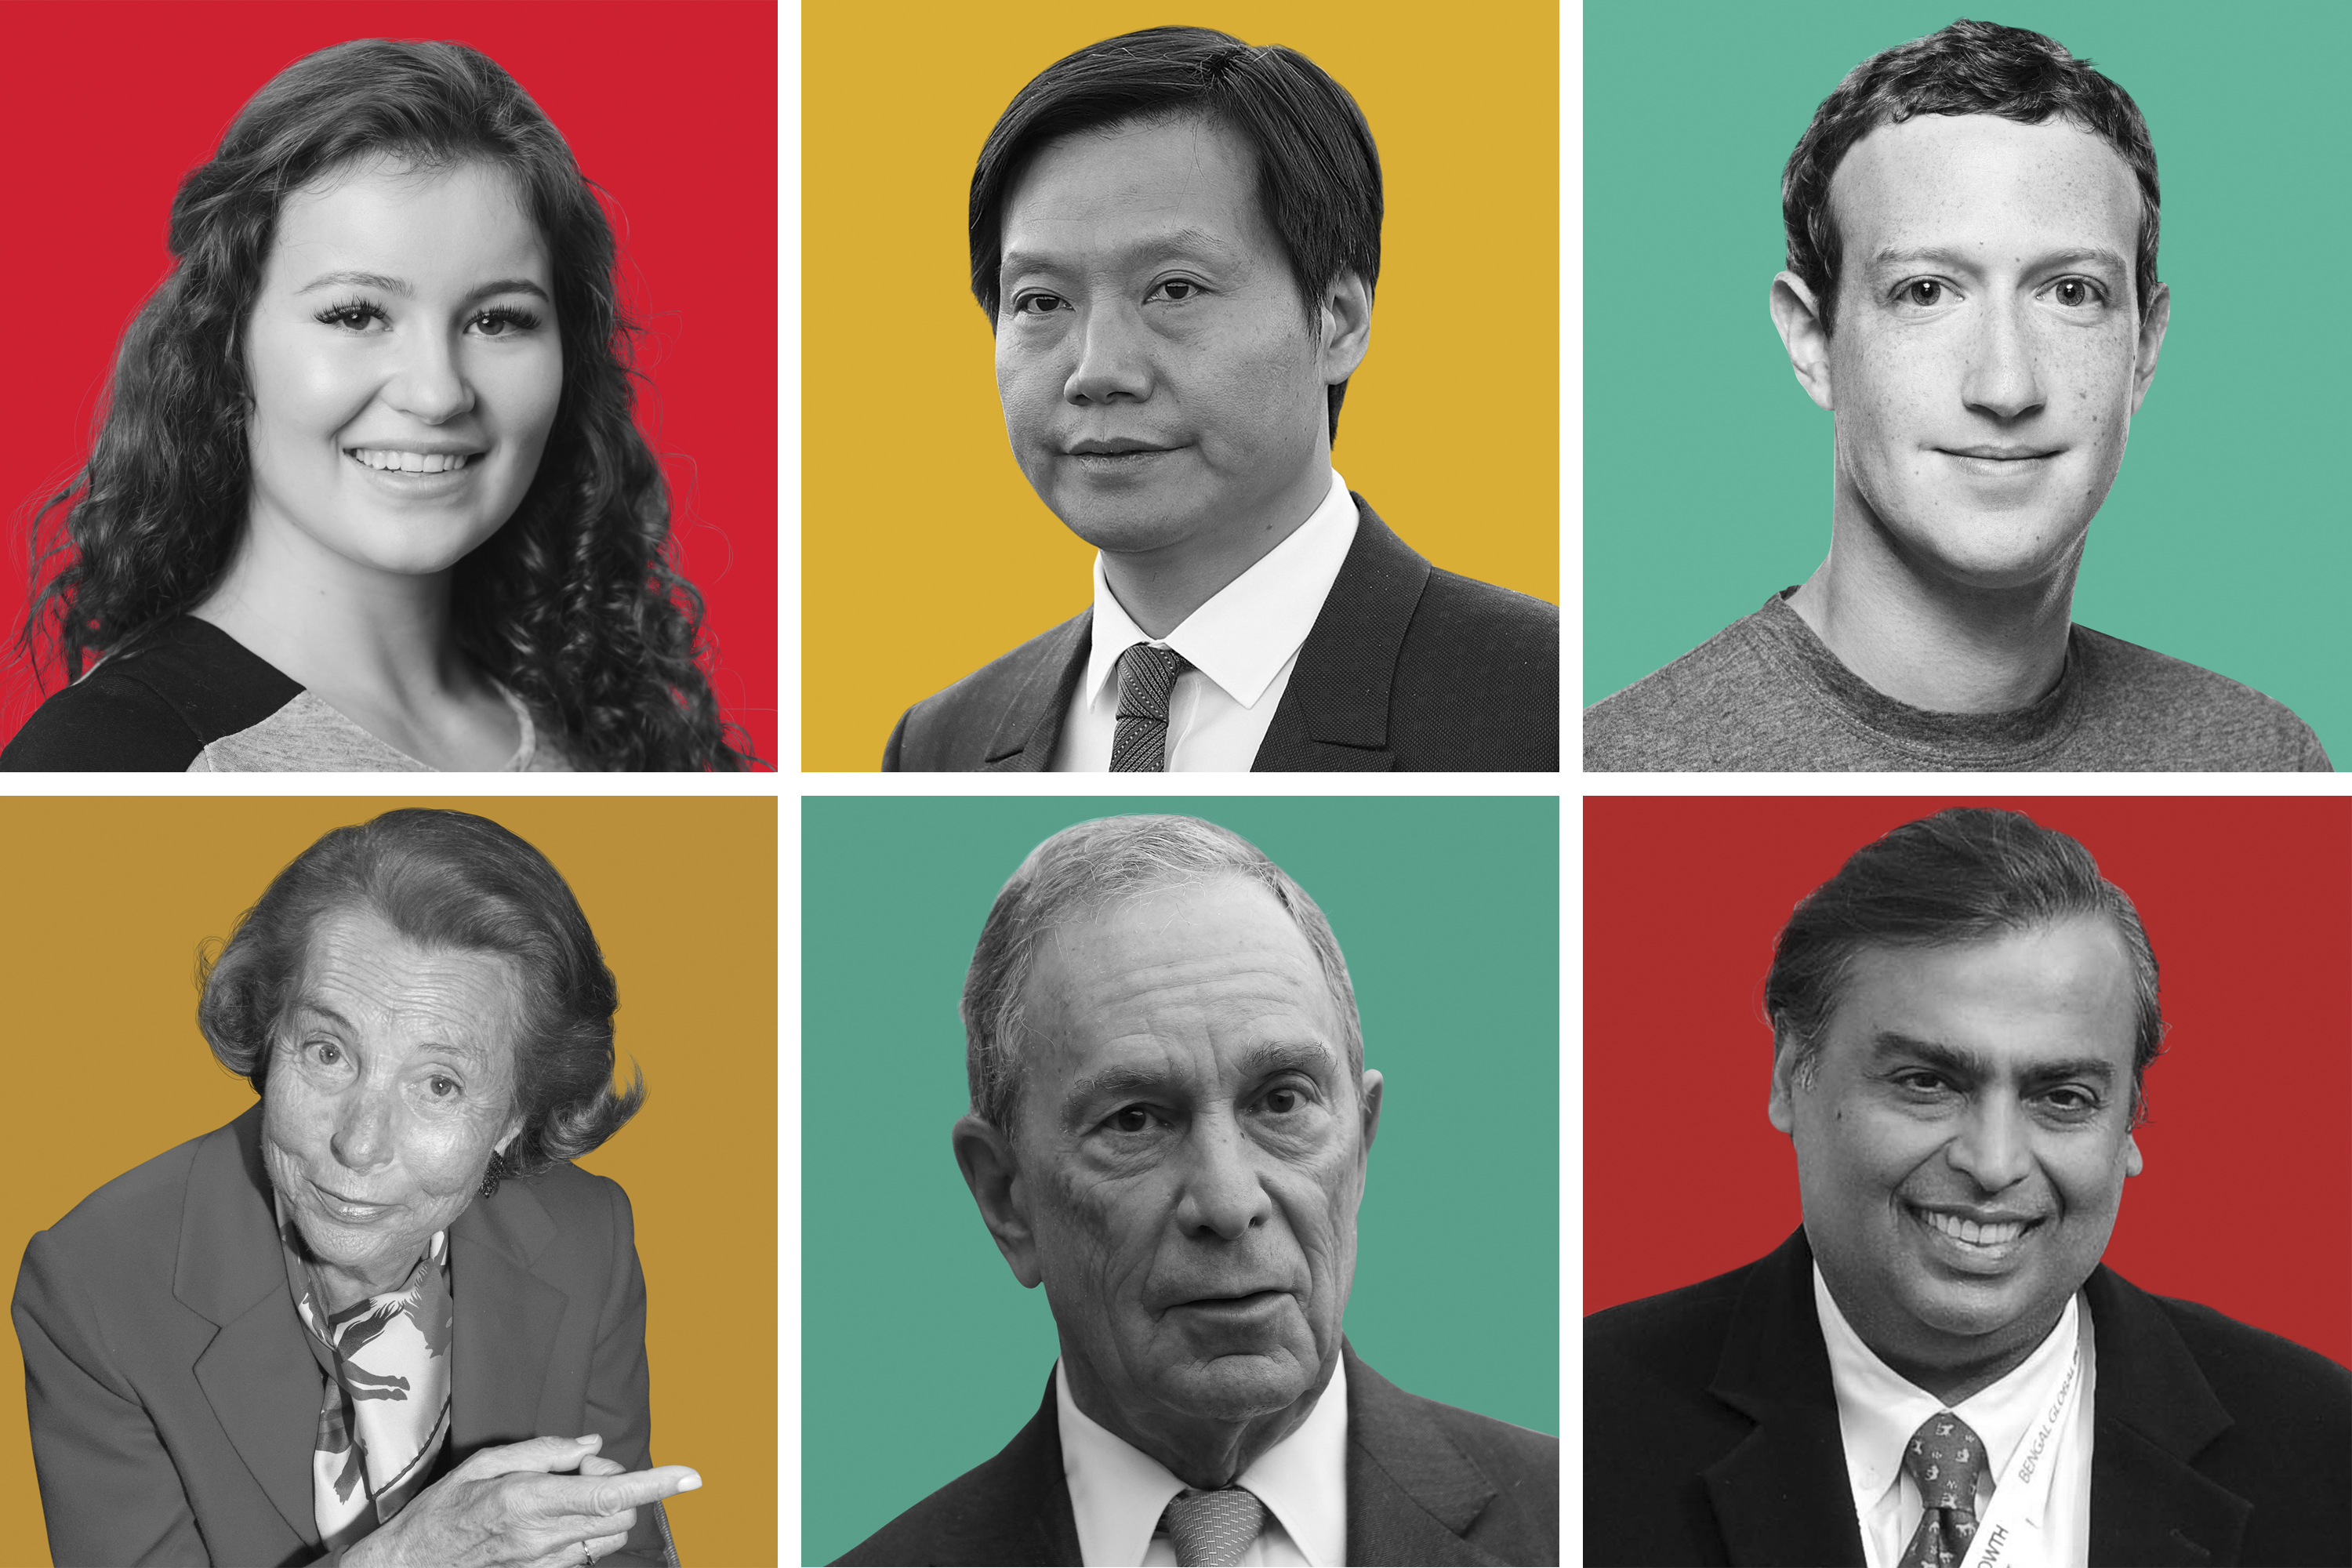 The World's Richest Person at Every Age